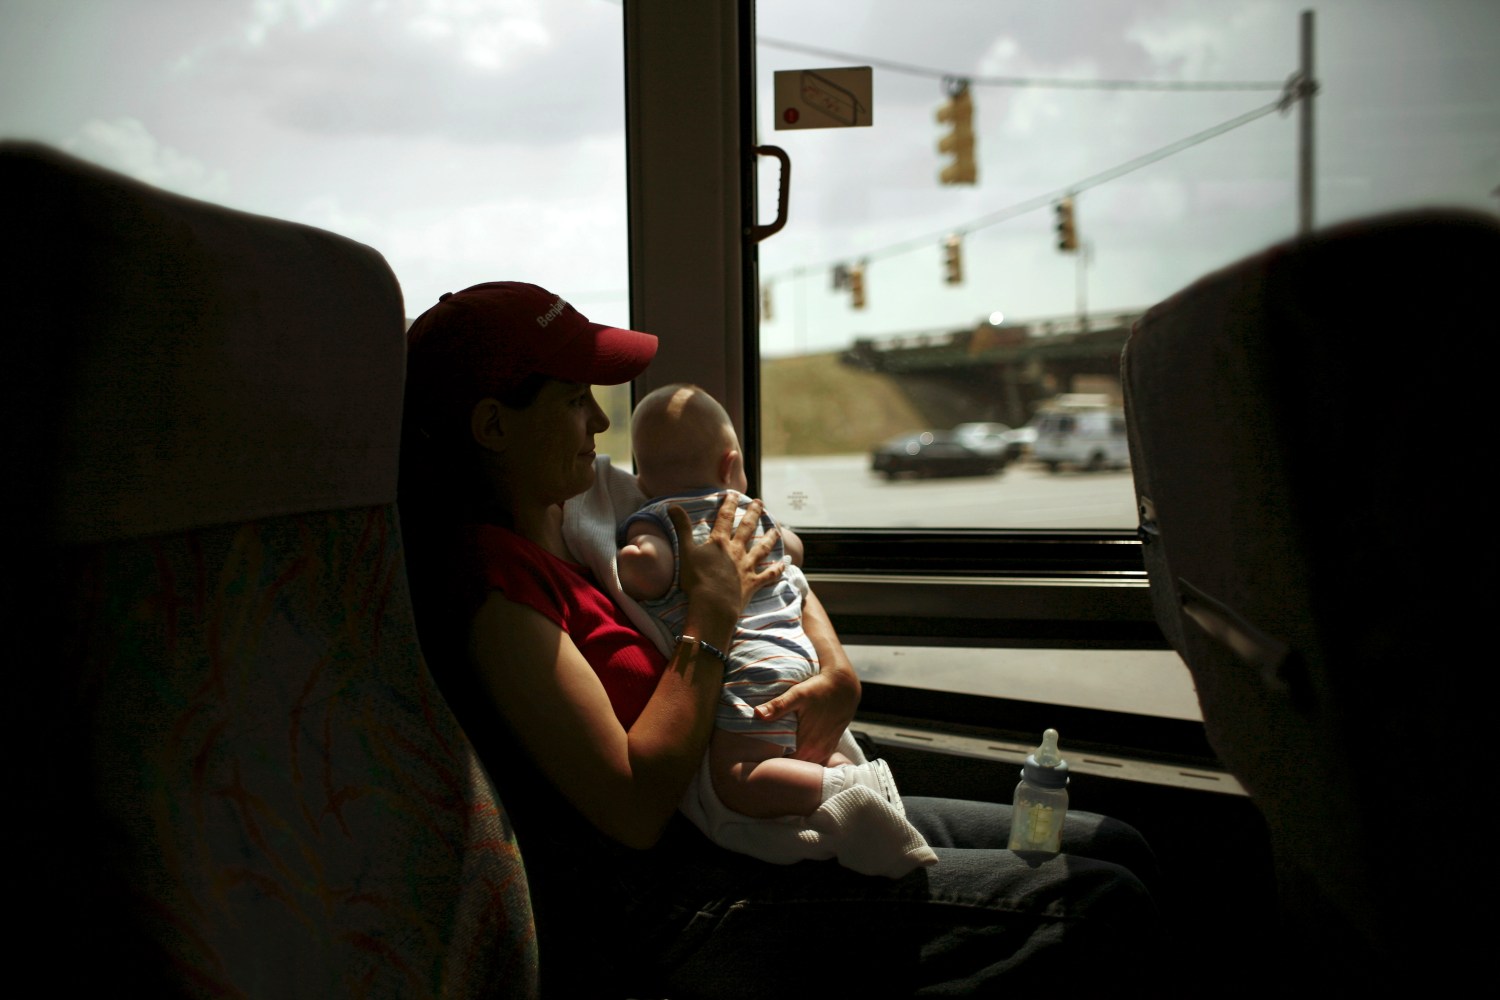 Angie Granpe and her son Eitan travel on a Greyhound bus in Montgomery, Alabama.